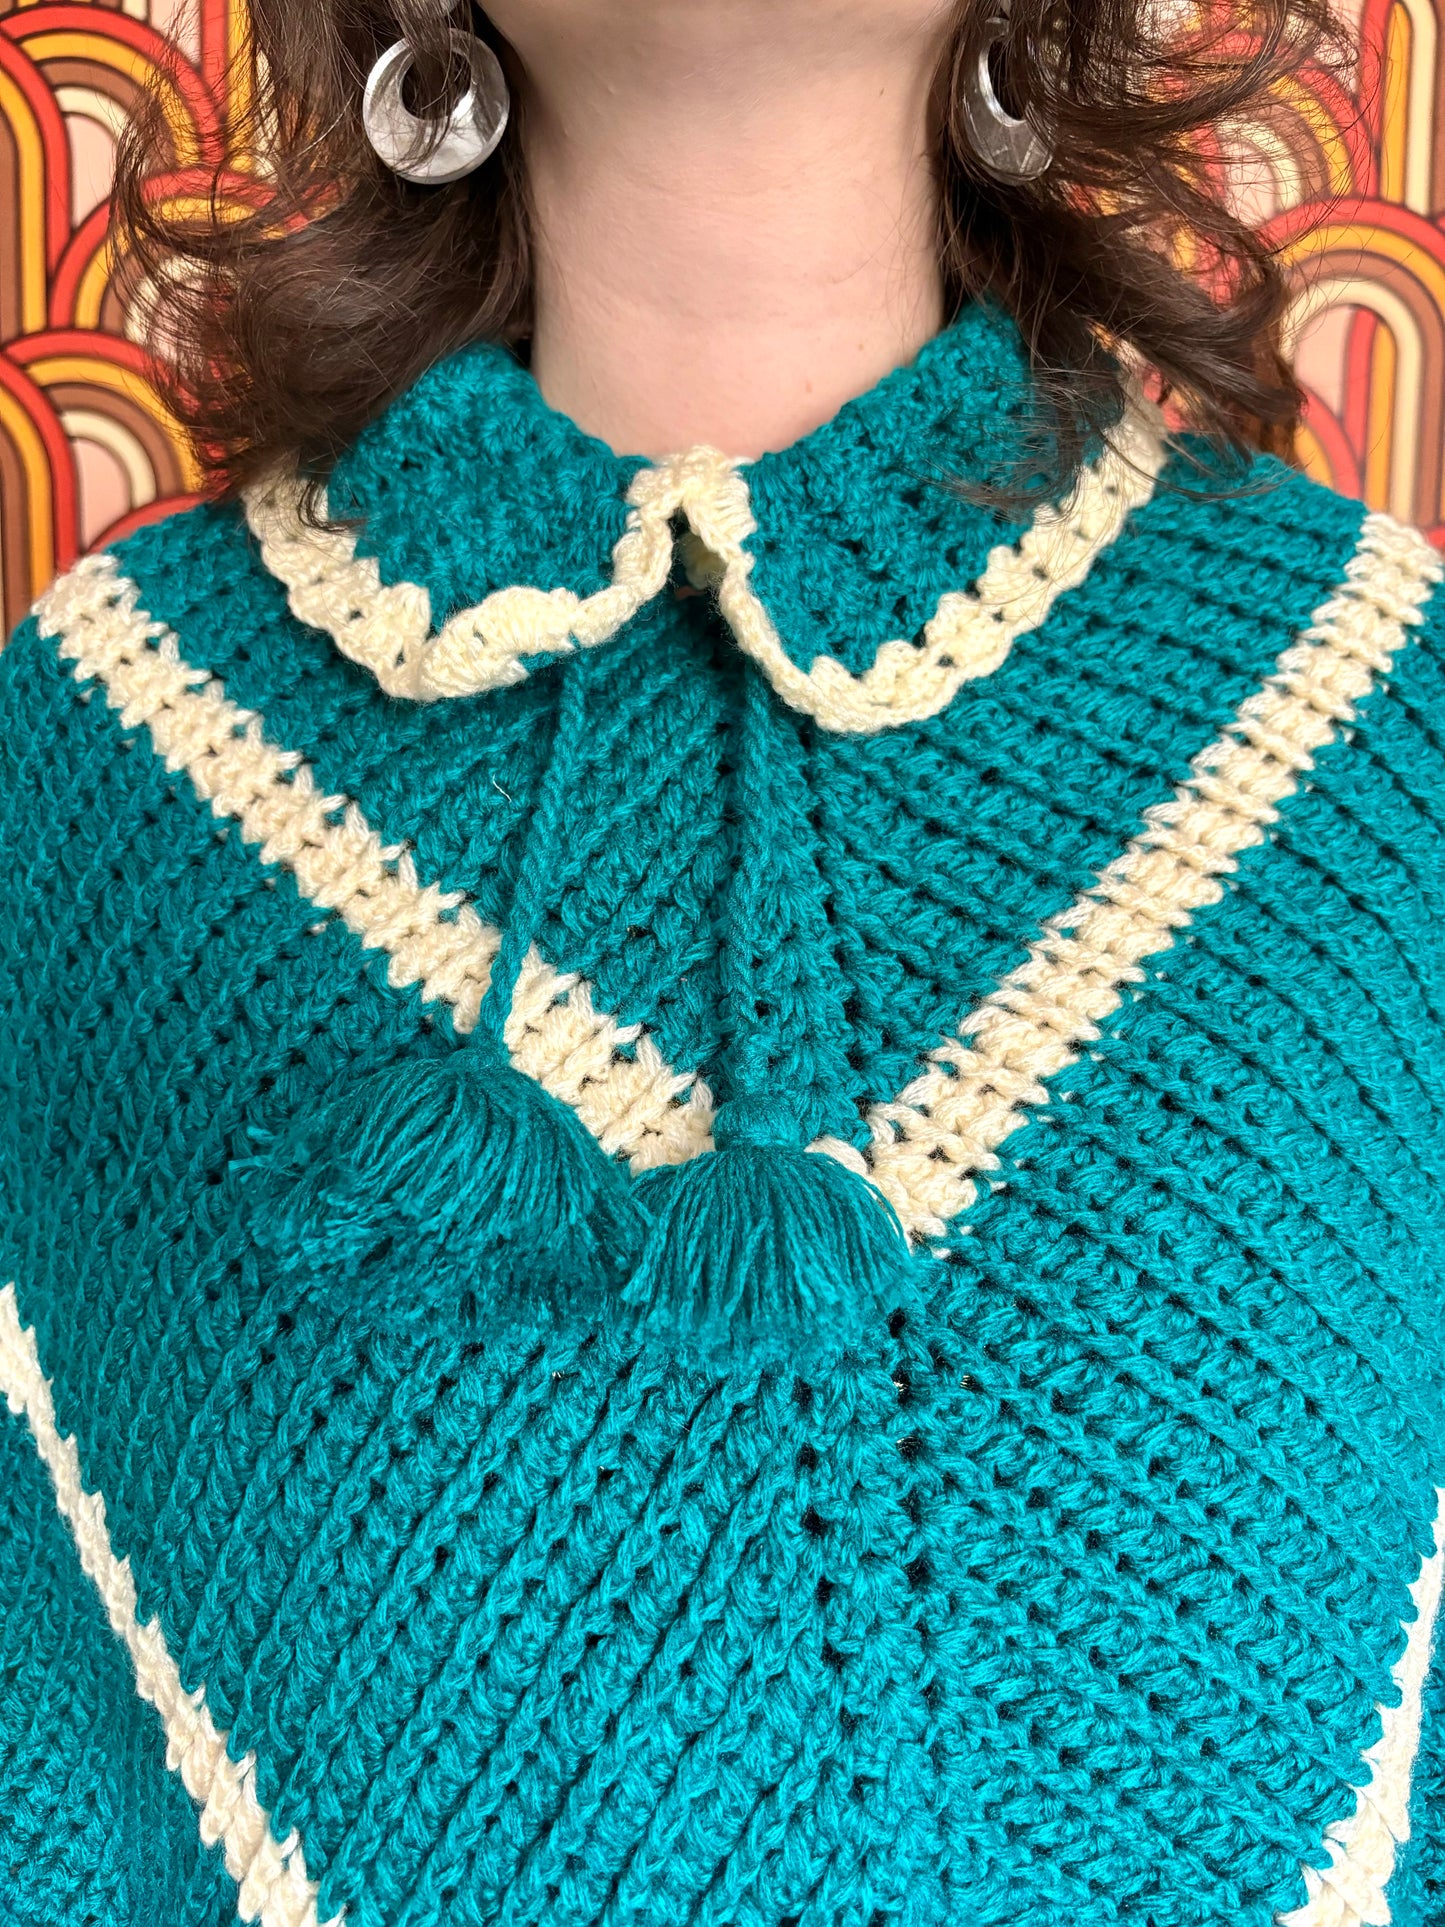 Vintage 70s Turquoise Knitted Poncho